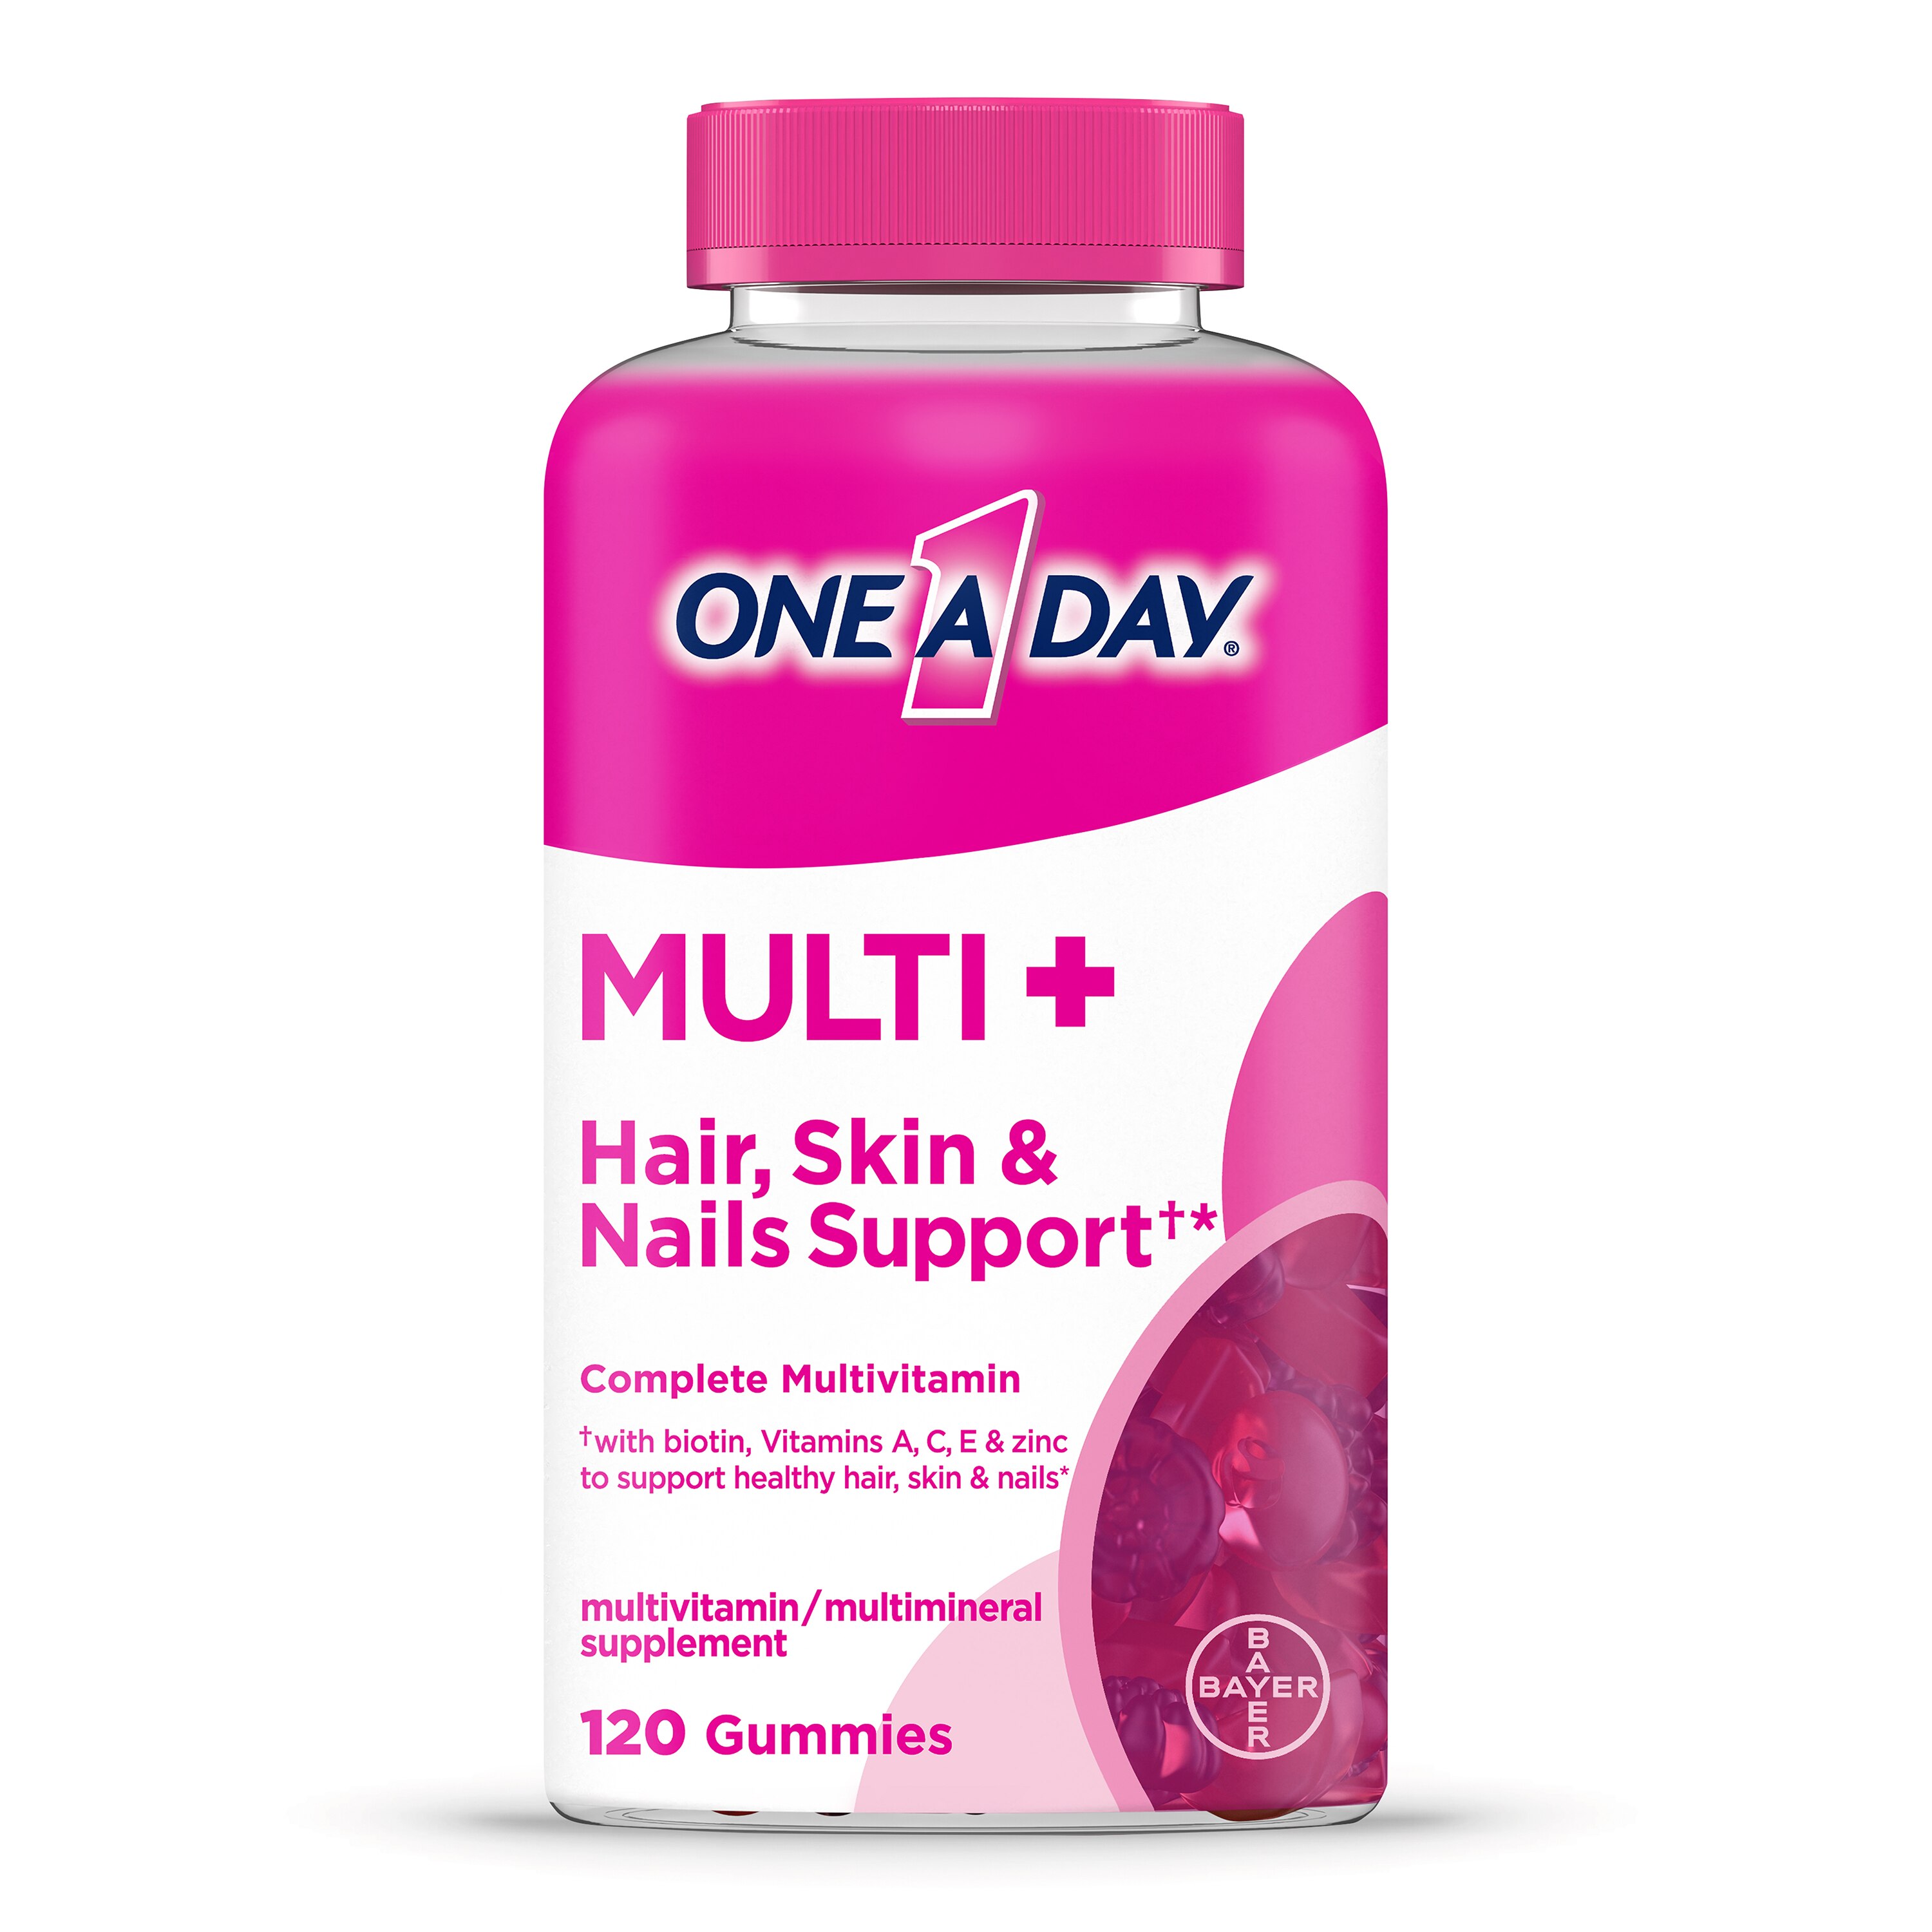 One A Day MultiPlus Hair Skin & Nails Multivitamin, 120CT